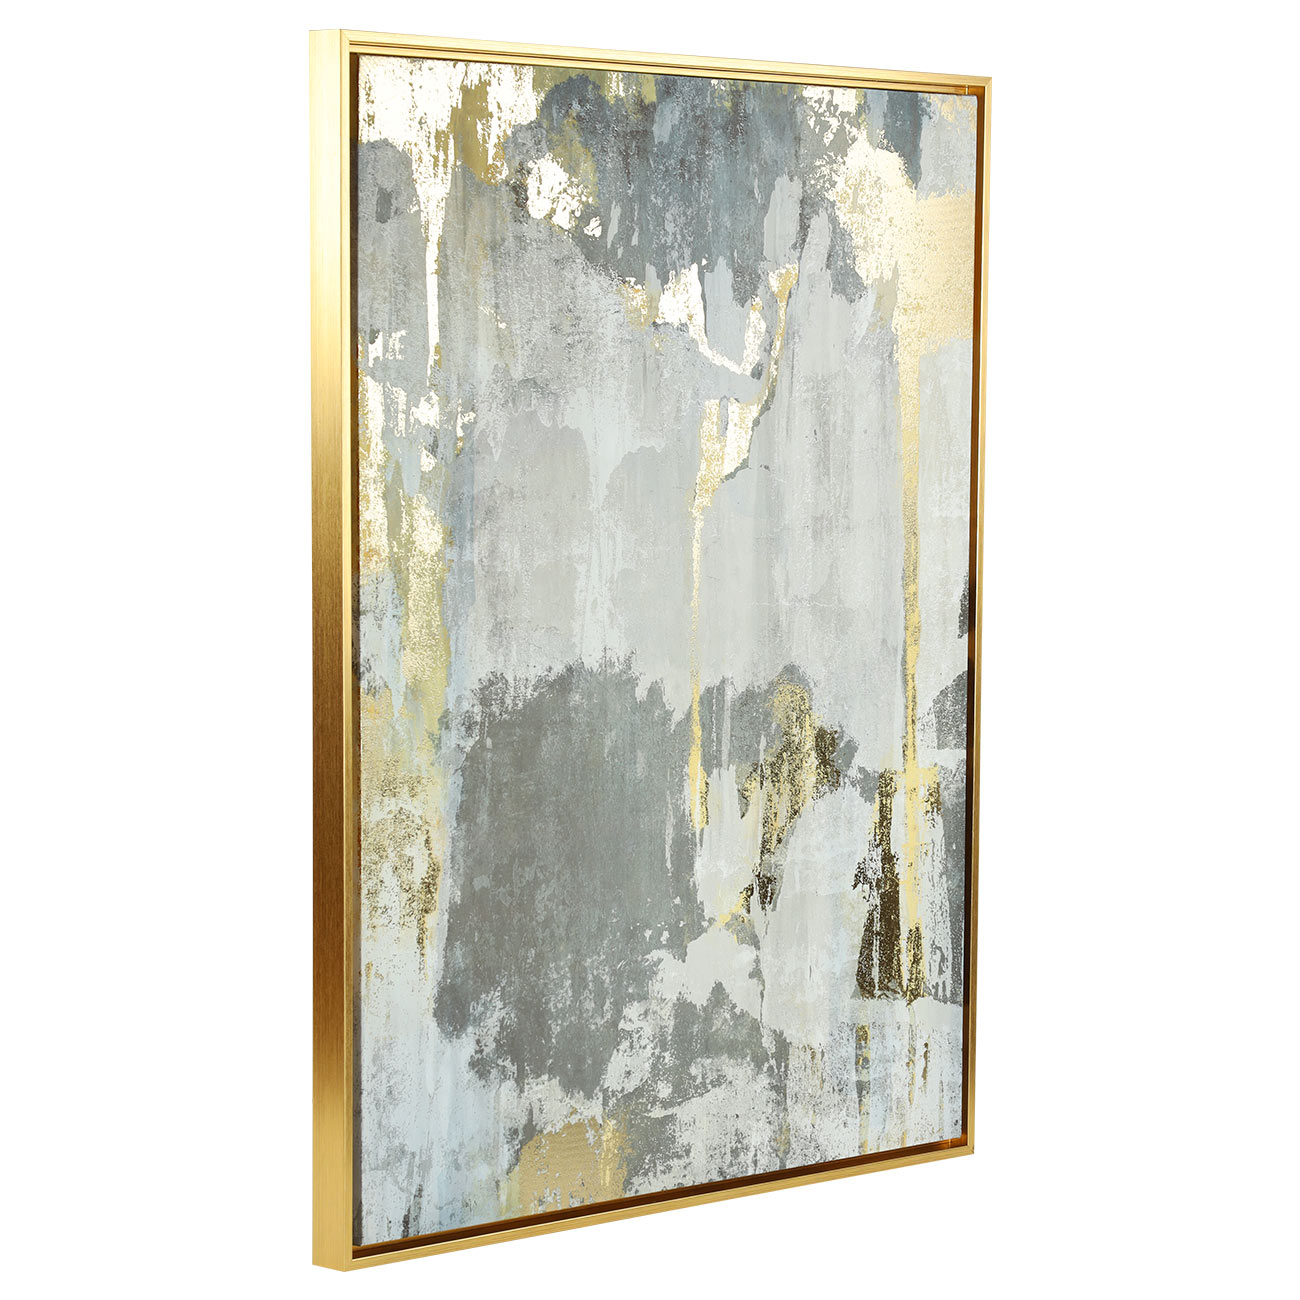 Framed painting, 75x100 cm, canvas / foil, golden gray, Abstract изображение № 2